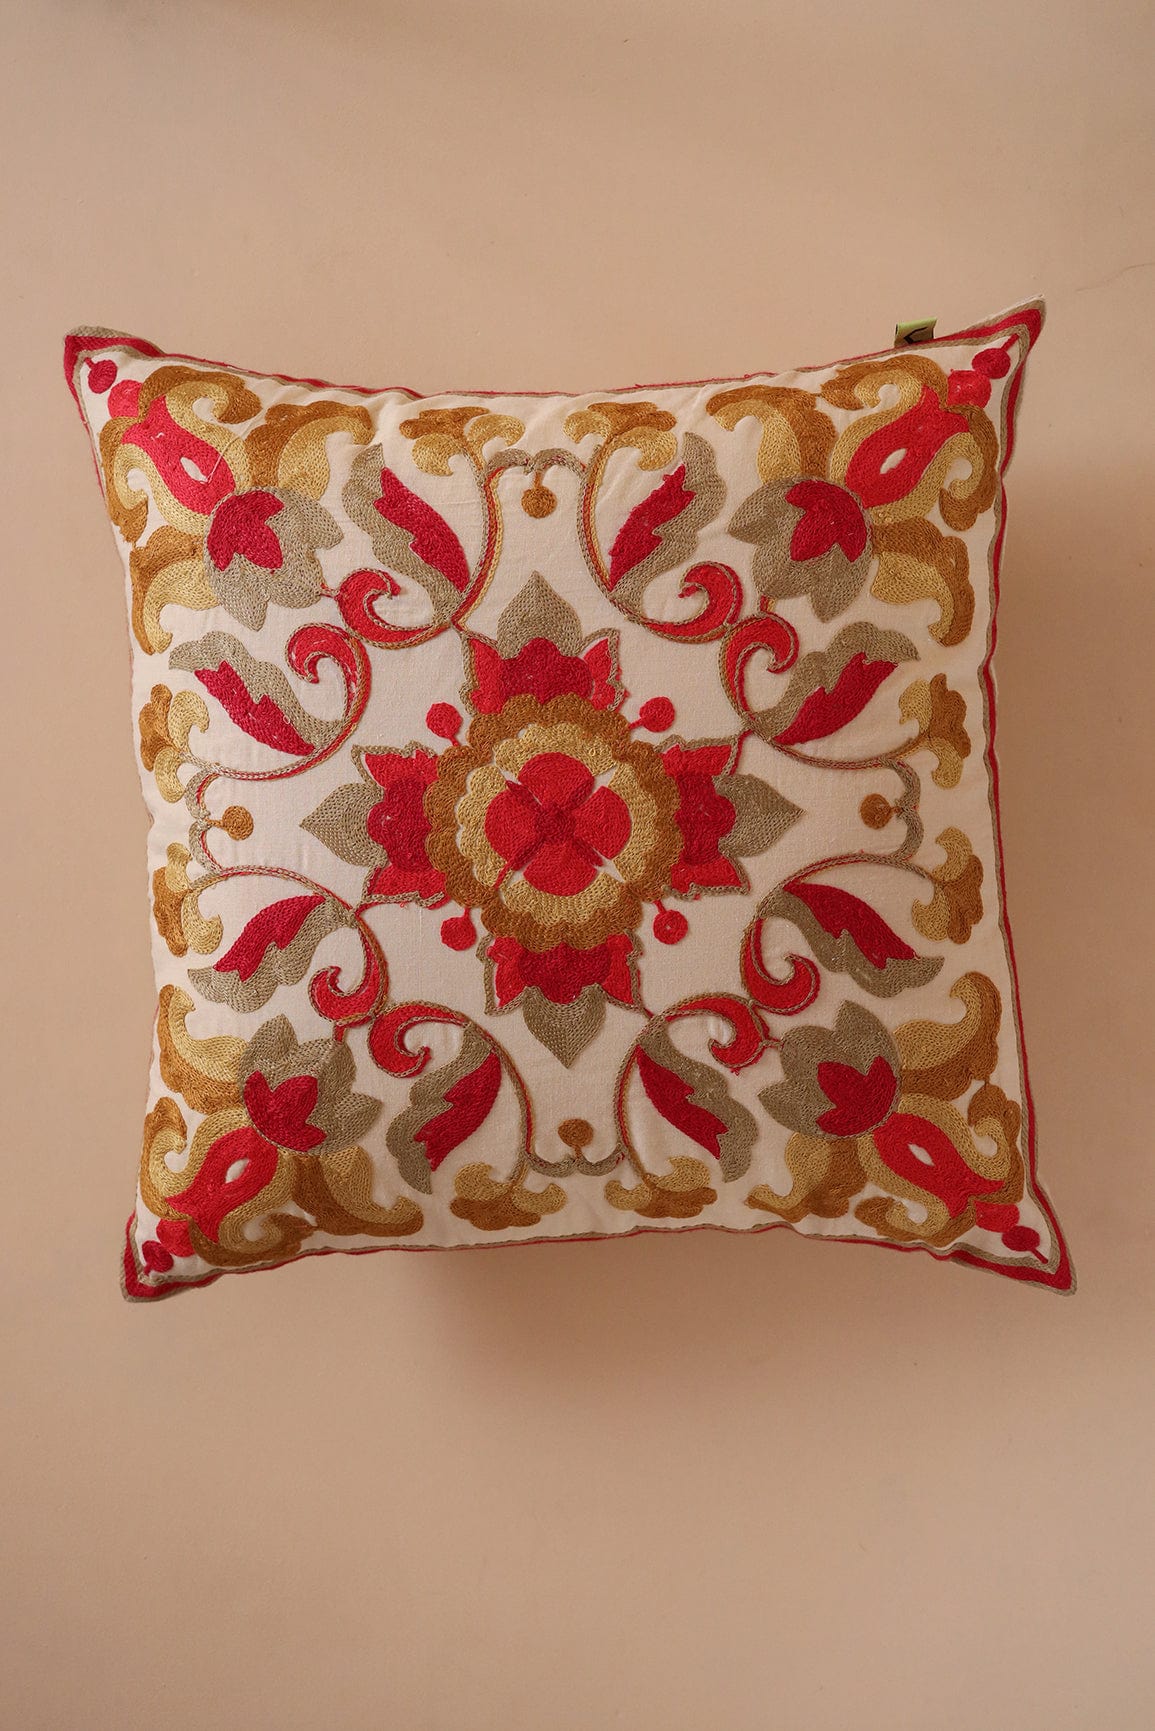 doeraa Royal Red and Gold Embroidery on off white cotton Cushion Cover (16*16 inches)